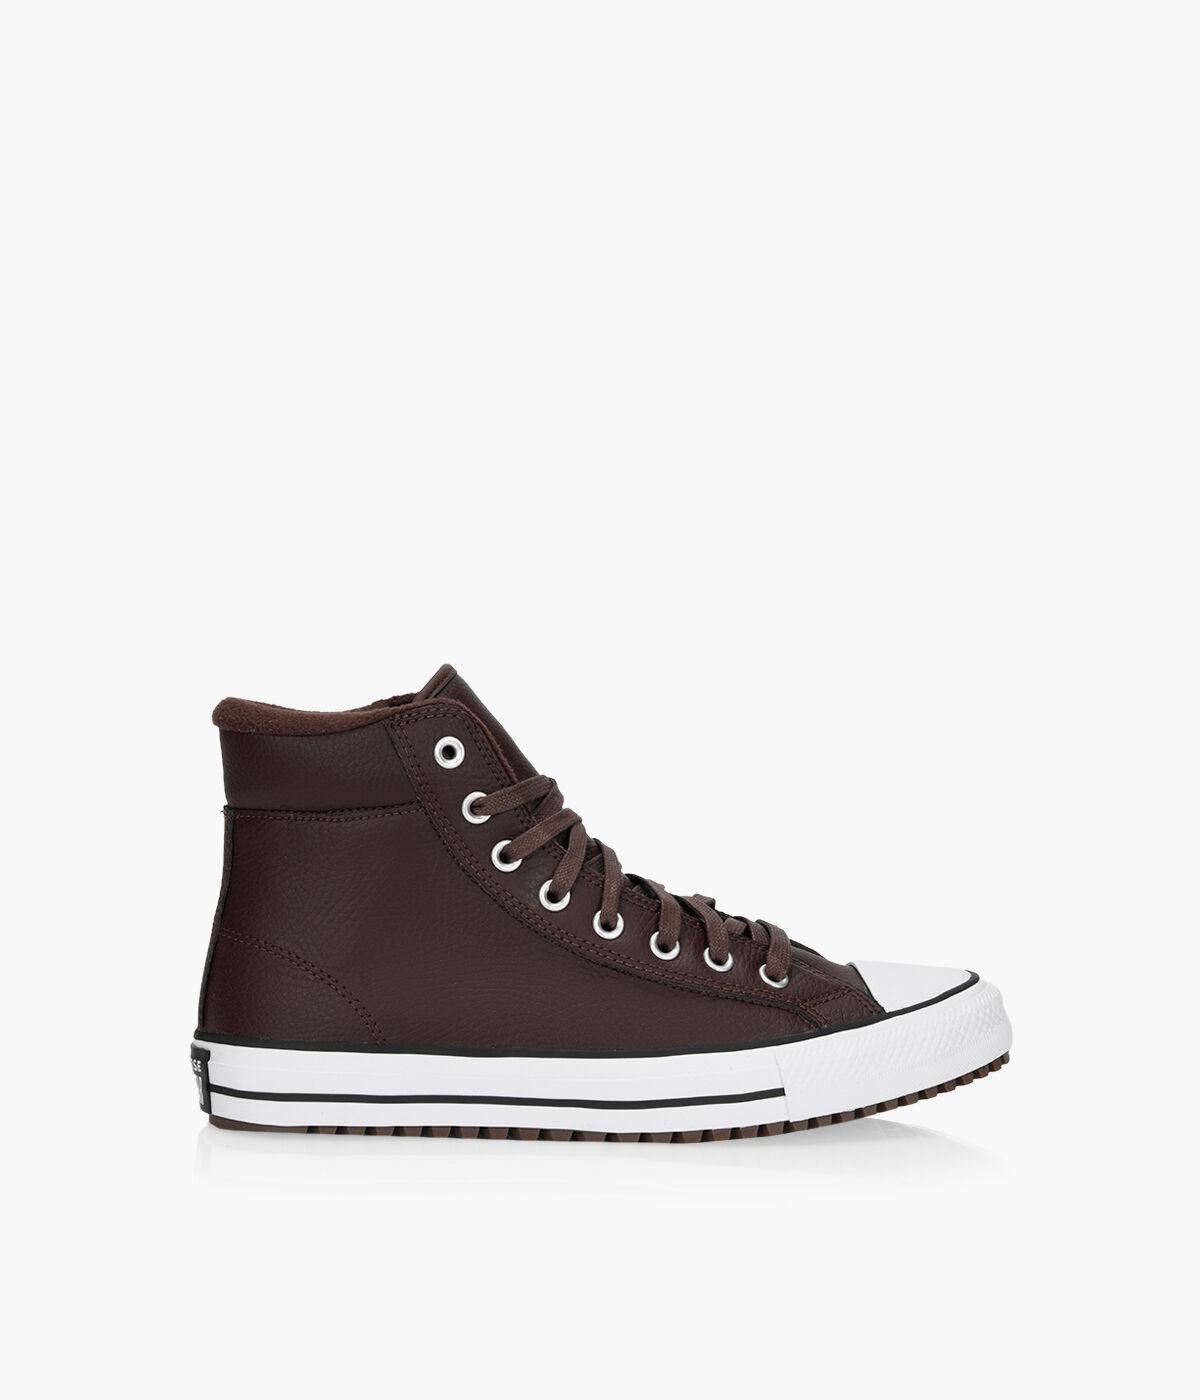 CONVERSE CHUCK TAYLOR PC BOOT - Leather 